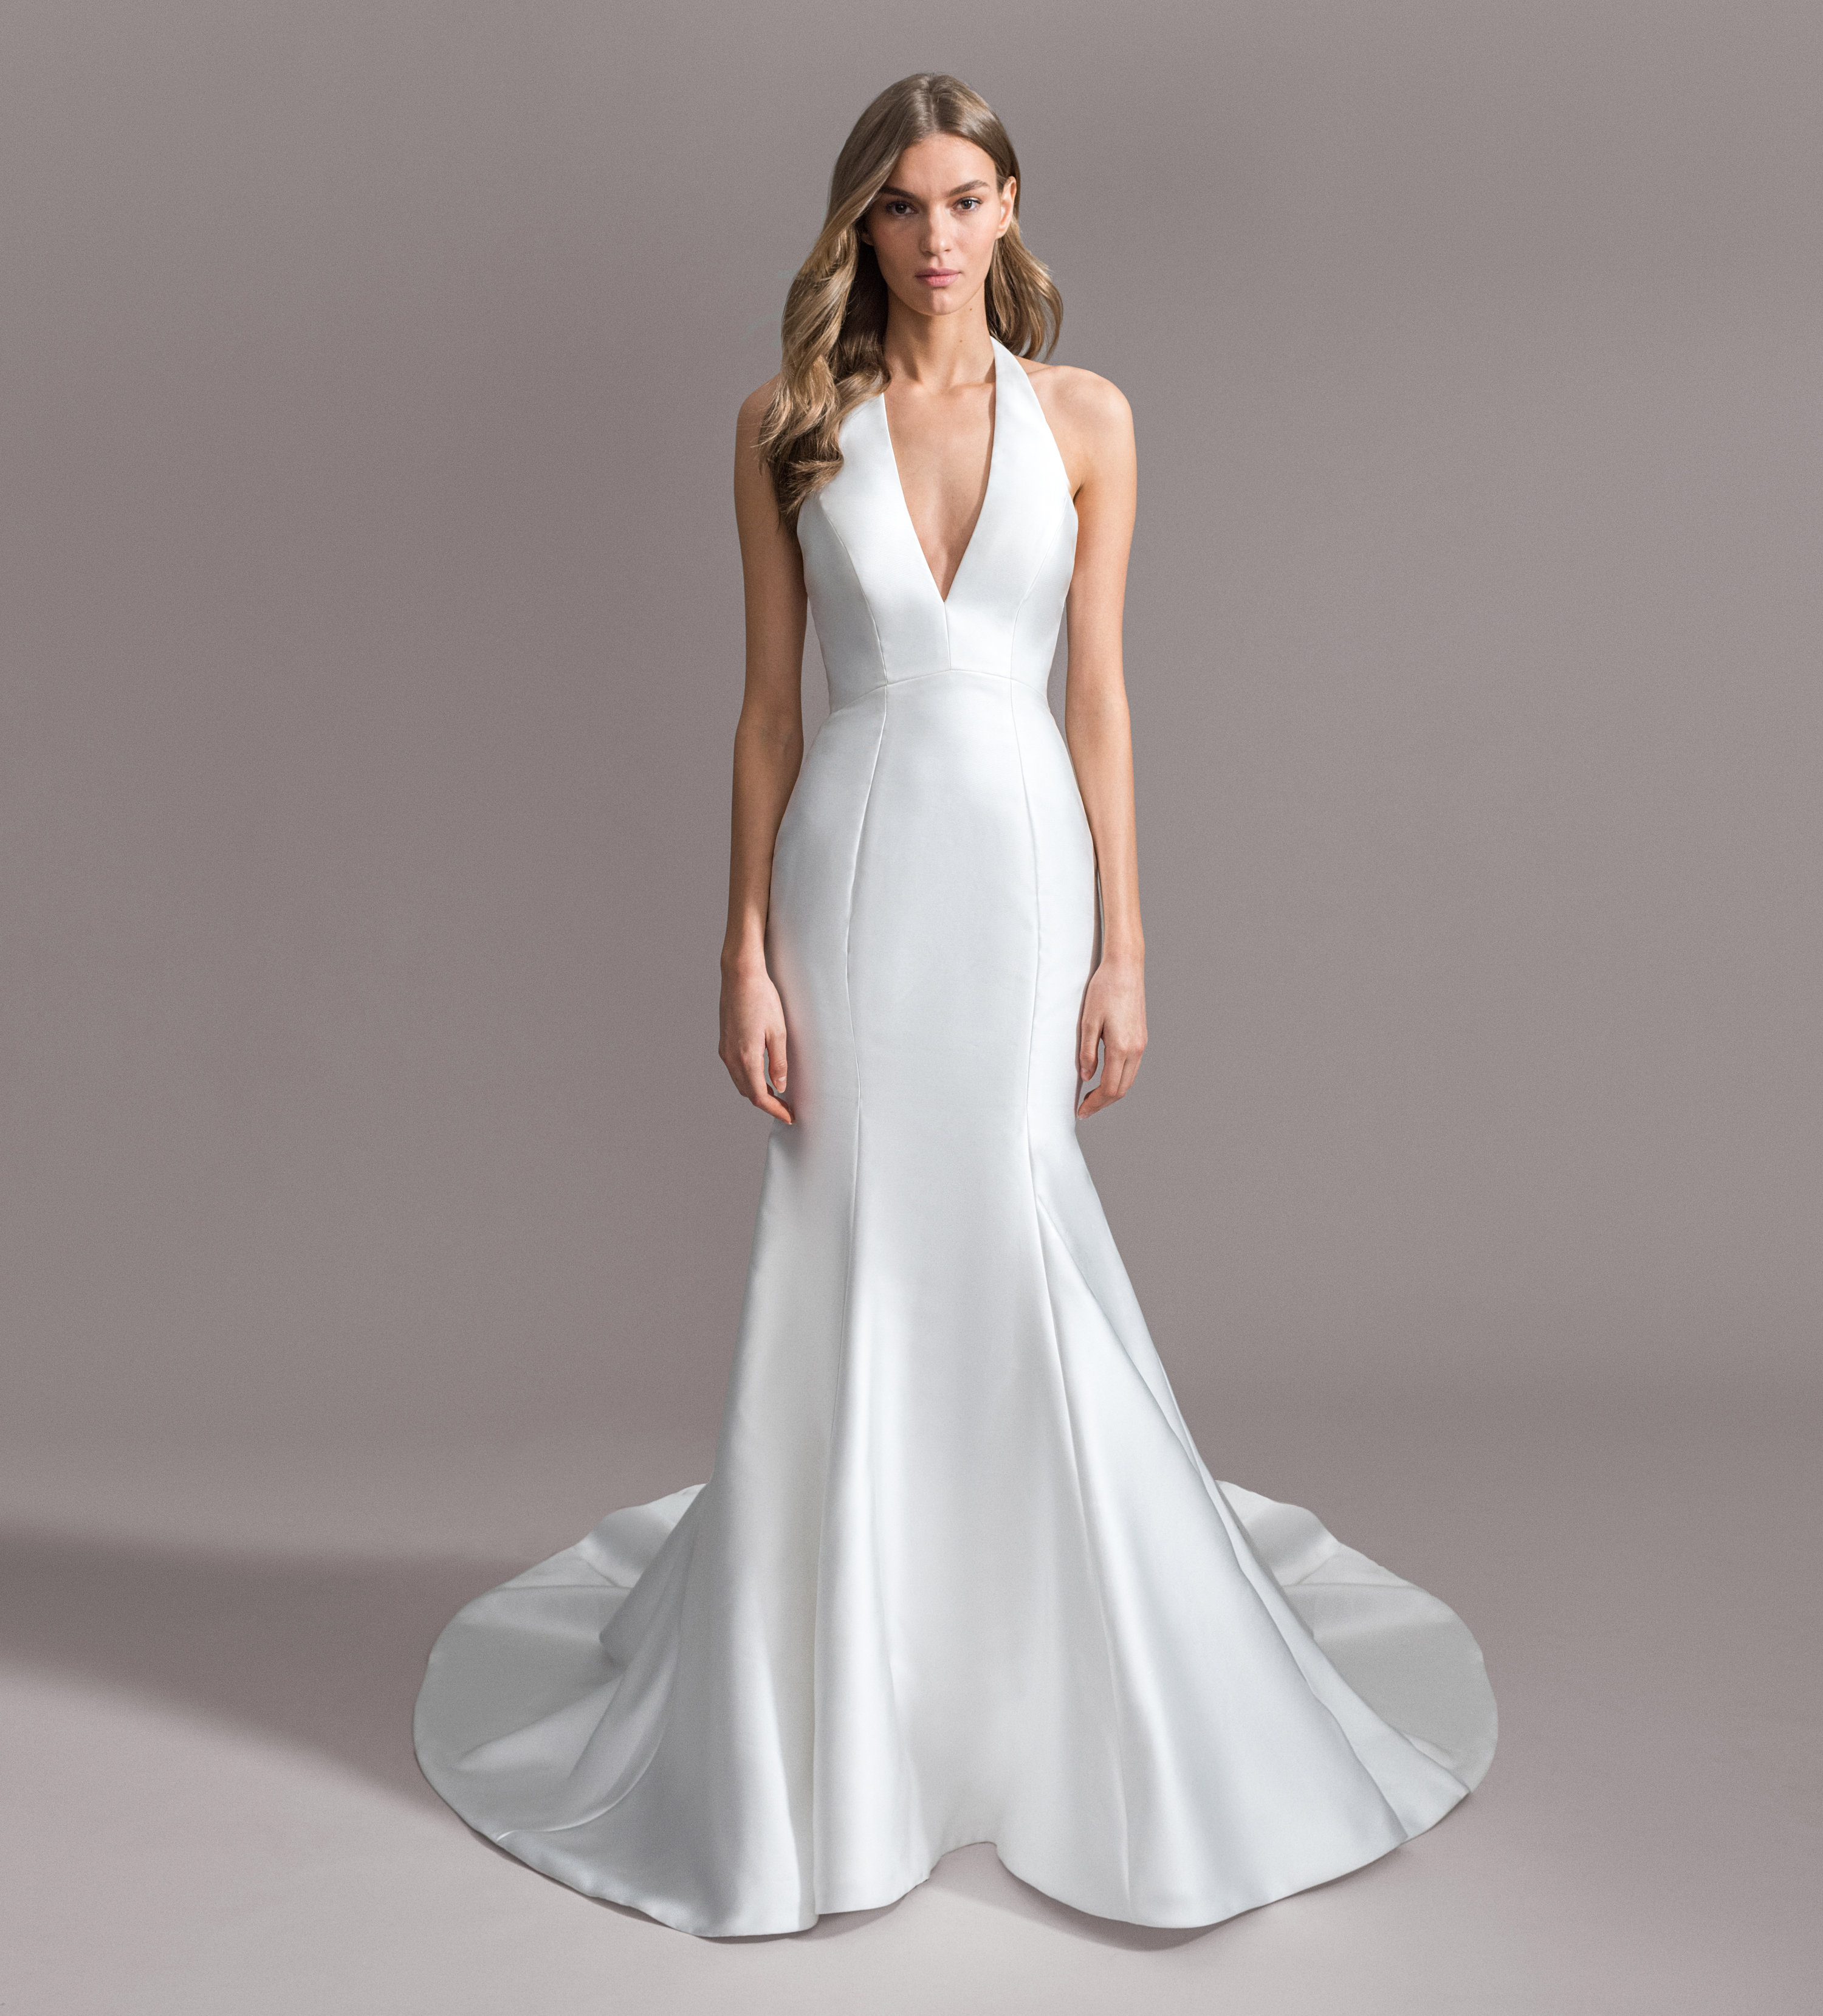 Bridal Gowns and Wedding Dresses by JLM Couture - Style 7952 Marley